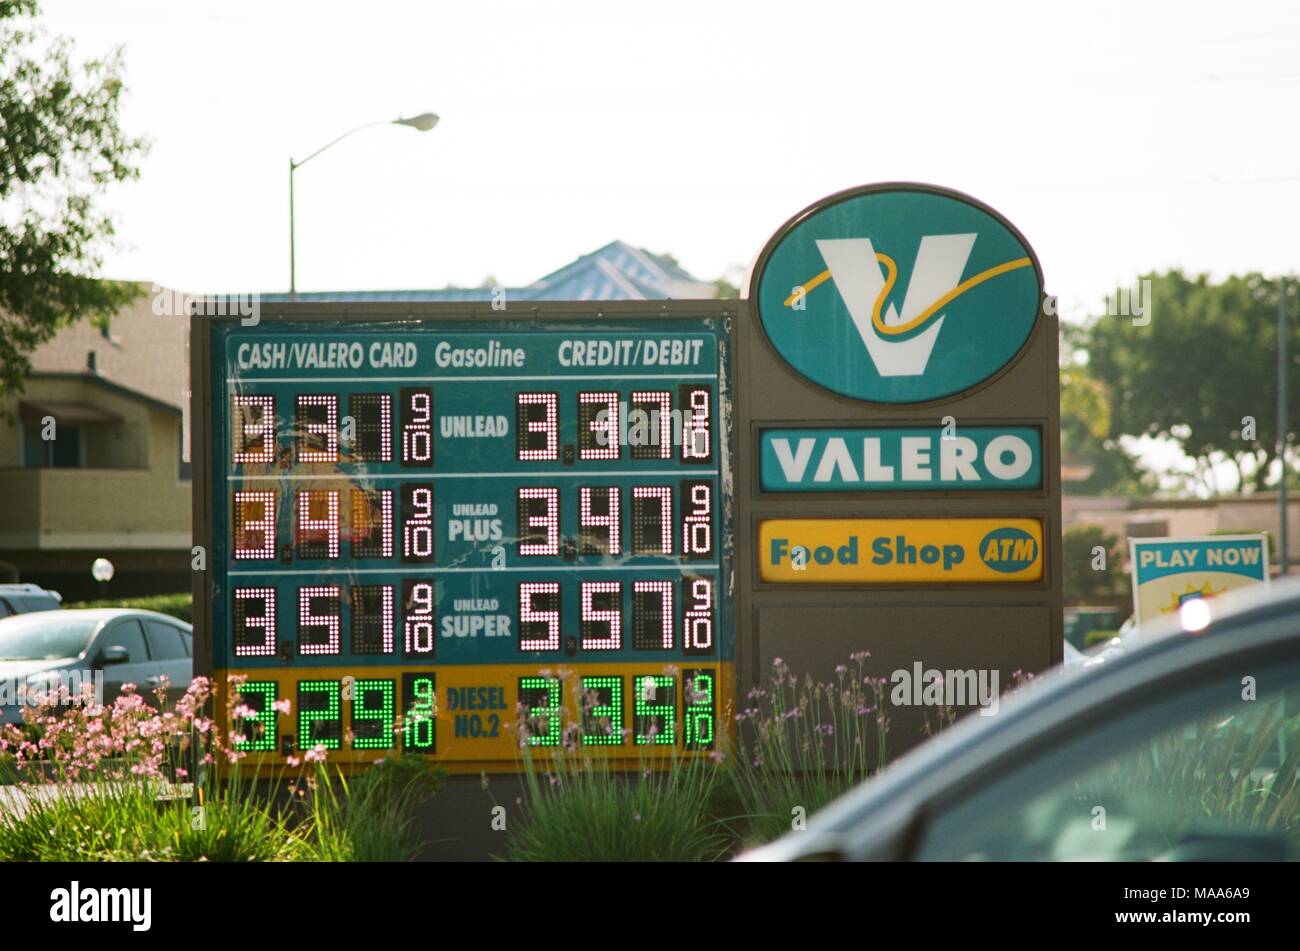 Price sign showing high gasoline prices at a Valero gas station in the San Francisco Bay Area, Concord, California, with an automobile approaching the station visible in the foreground, September 8, 2017. () Stock Photo